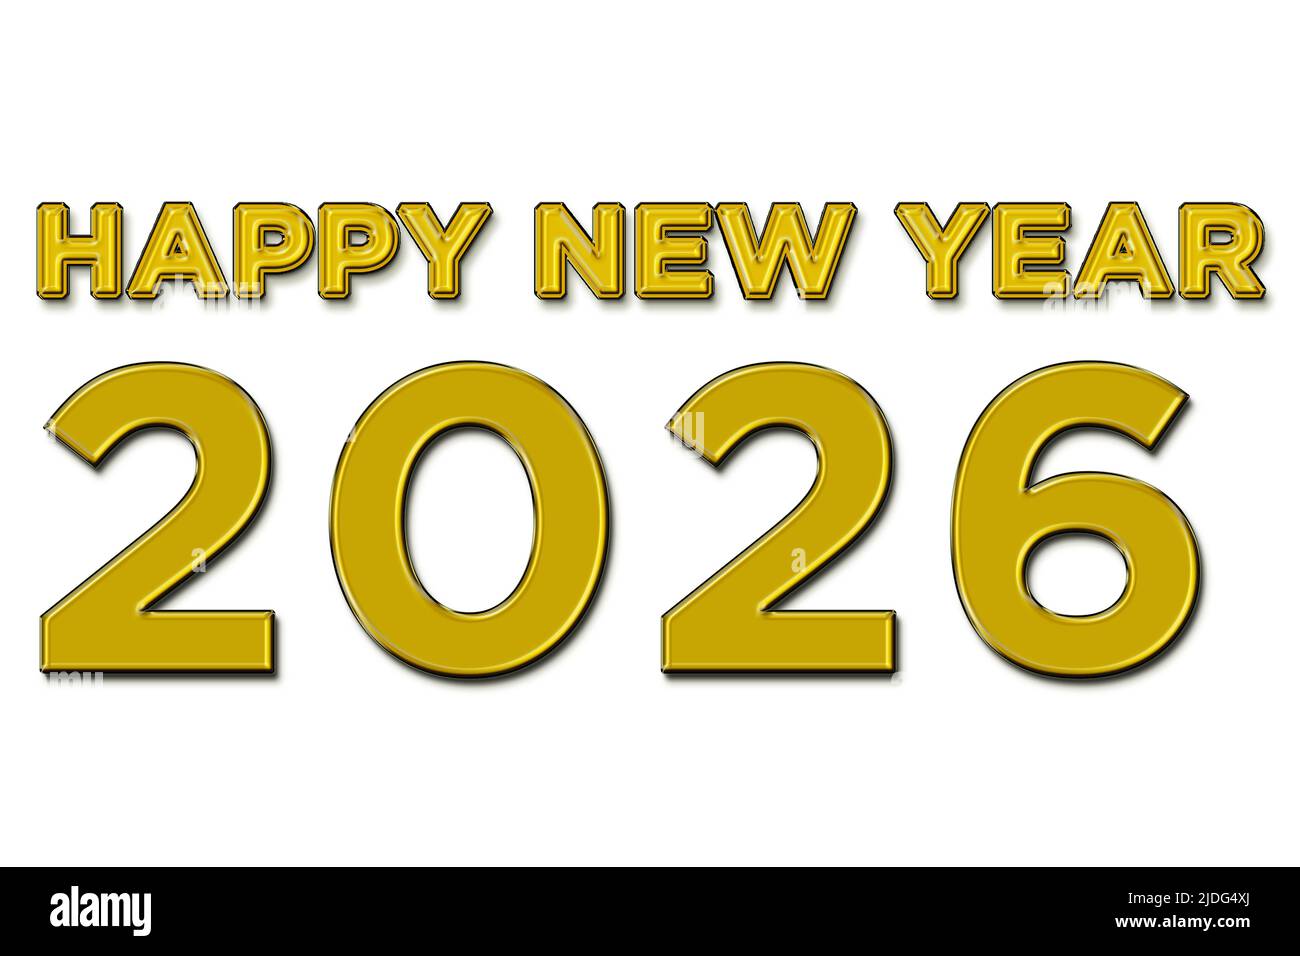 Happy new year 2026 illustration in yellow color text on white background Stock Photo